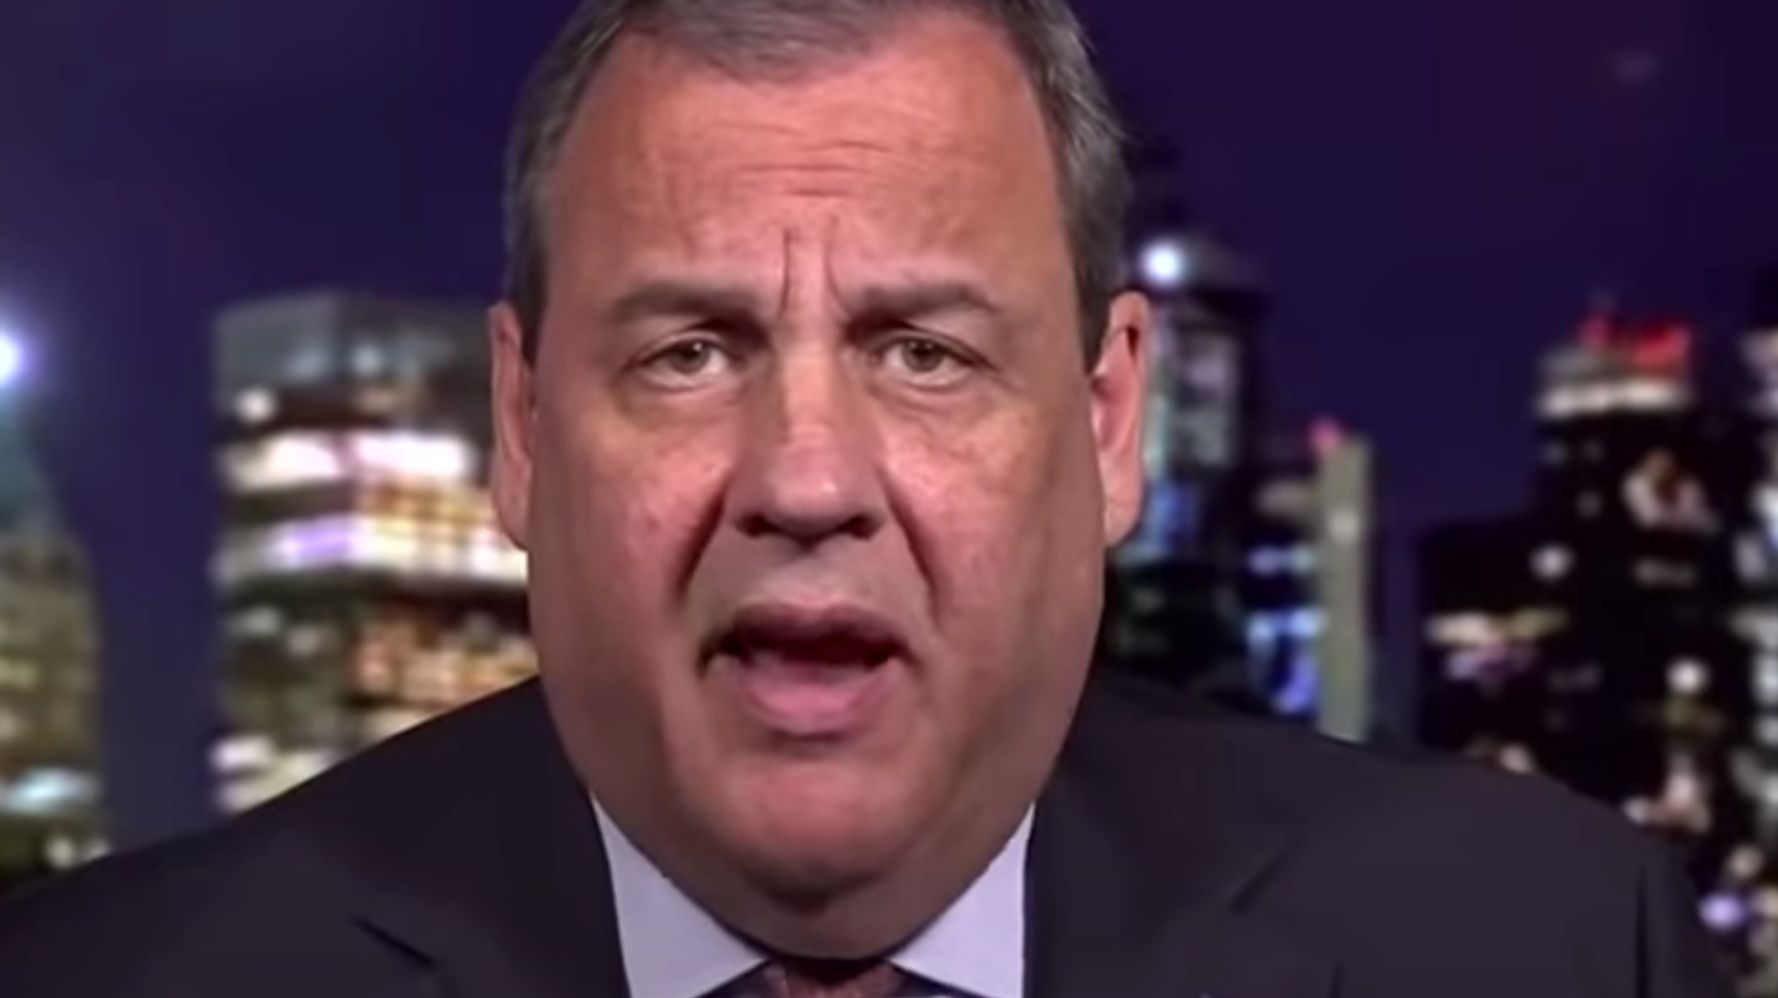 Chris Christie Gives One-Term, Twice-Impeached Trump An 'A' For His Presidency